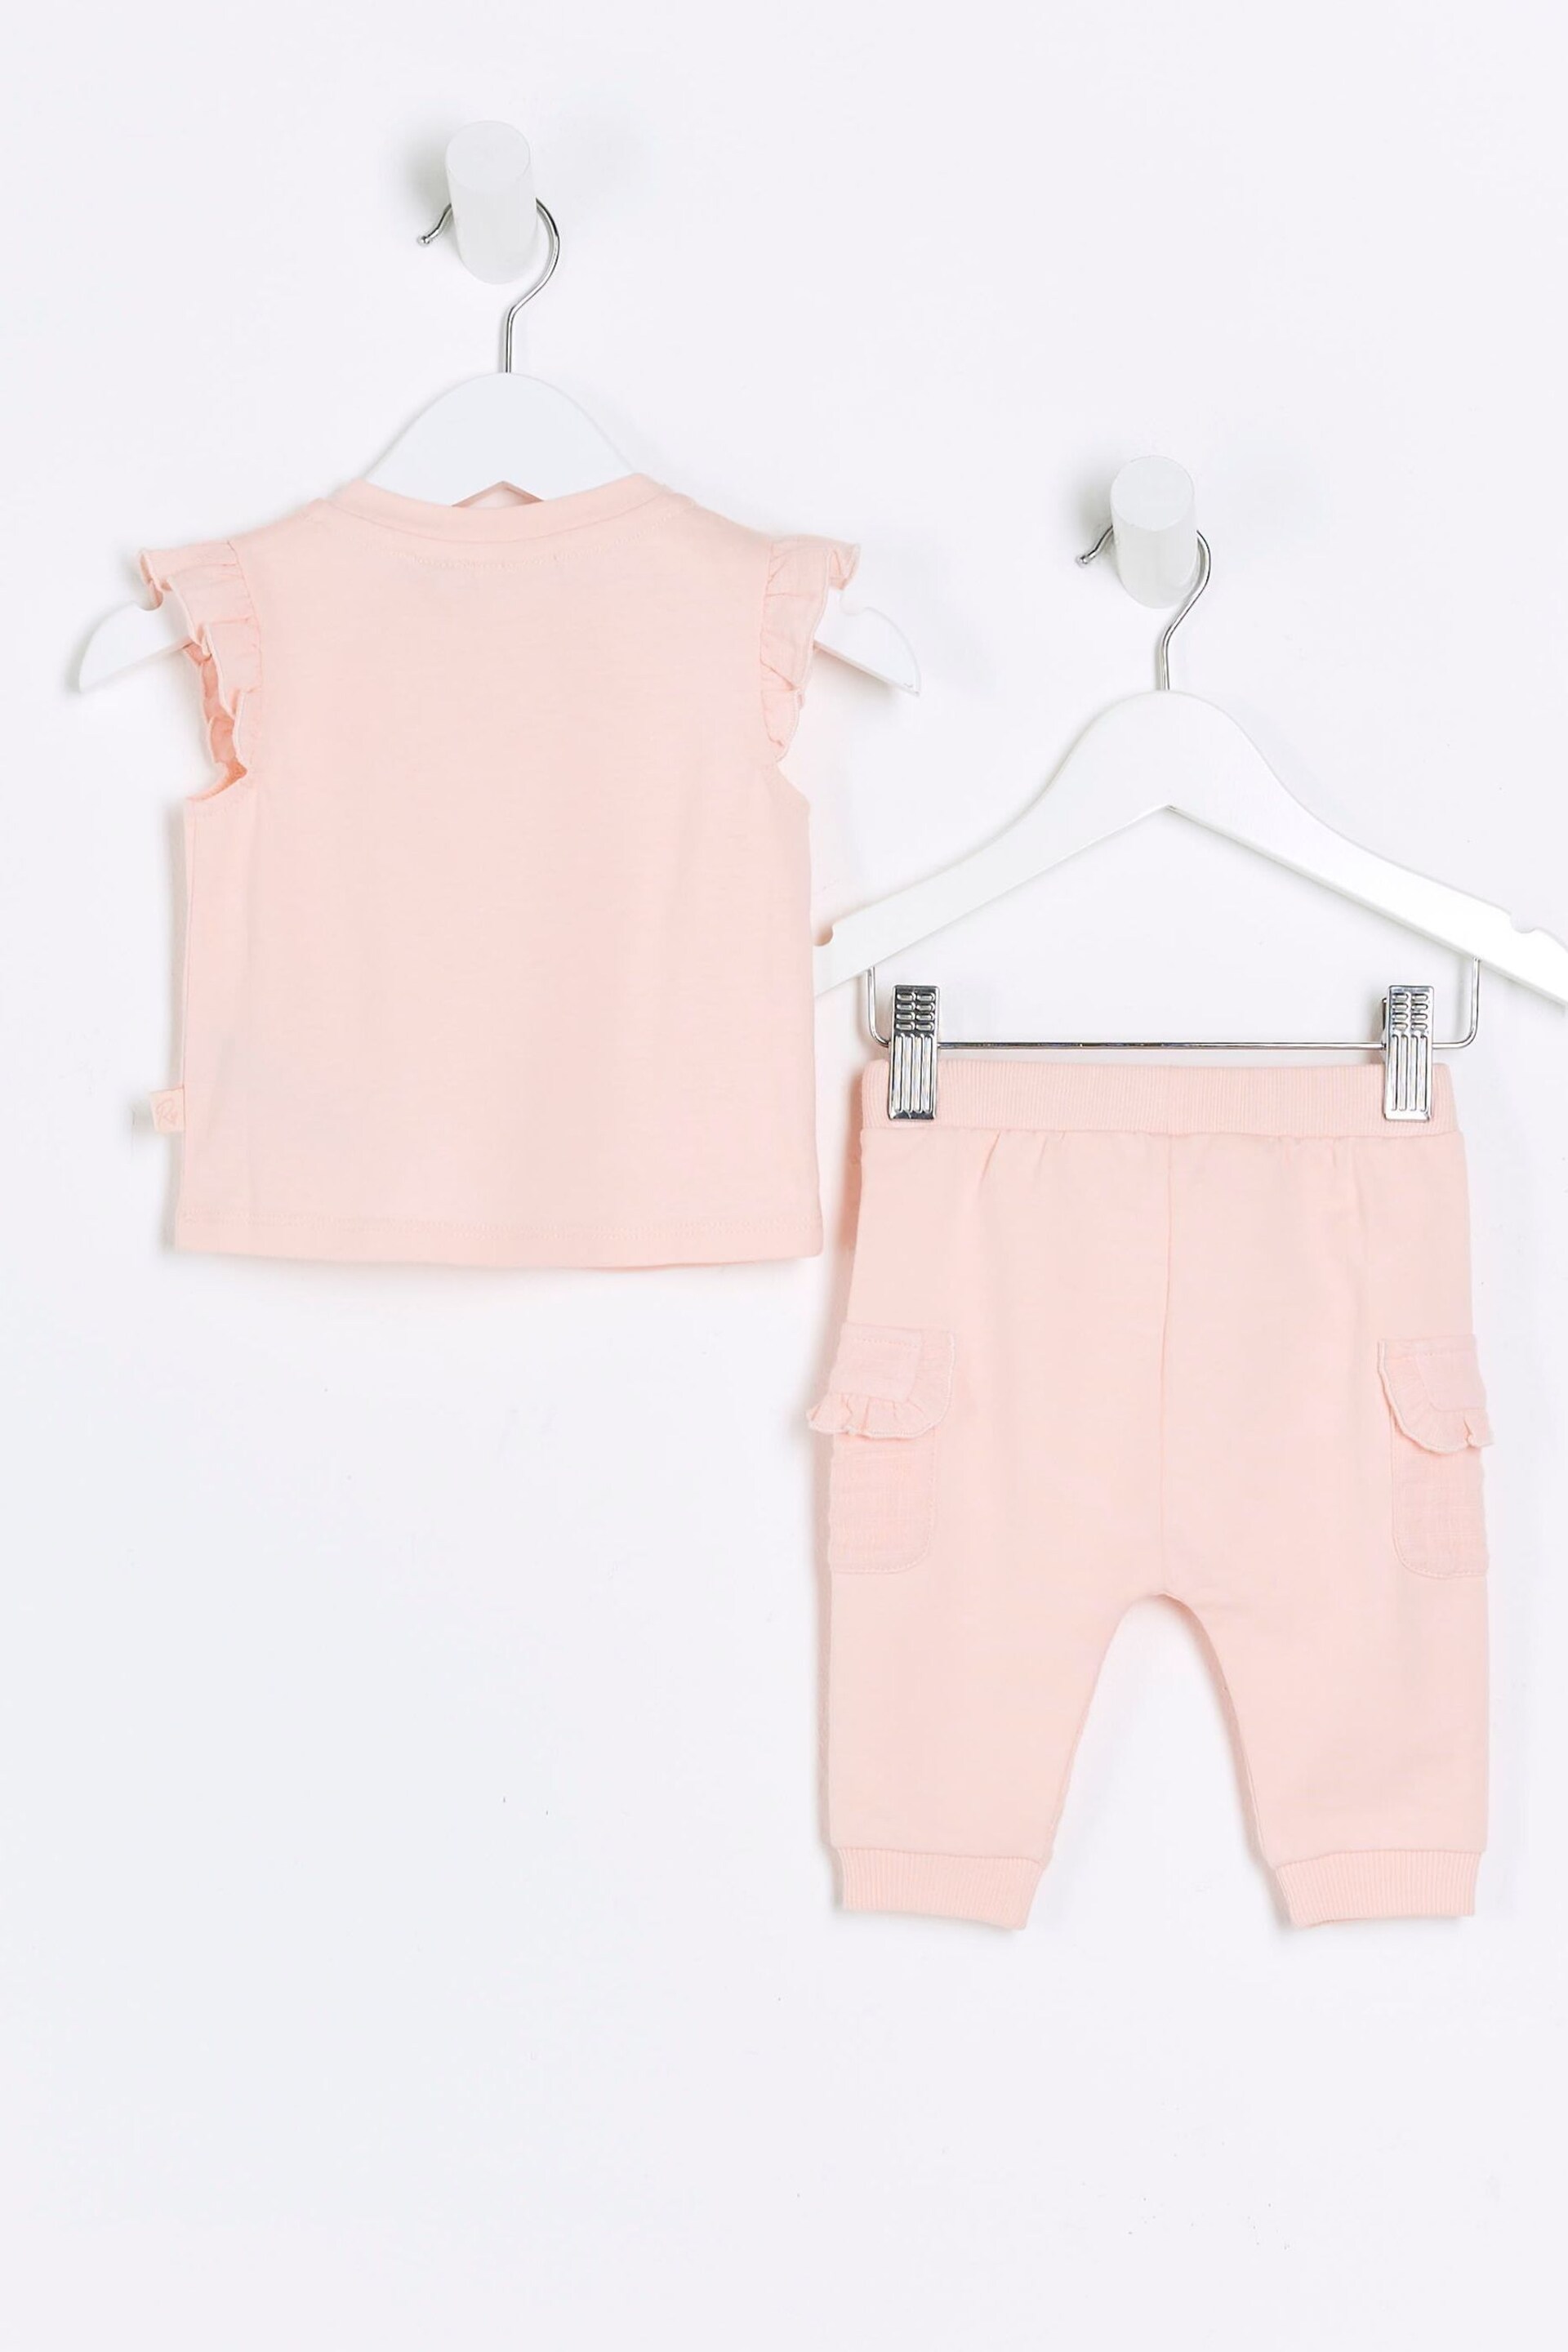 River Island Pink Baby Girls Hybrid T-Shirt And Jogger Set - Image 2 of 4